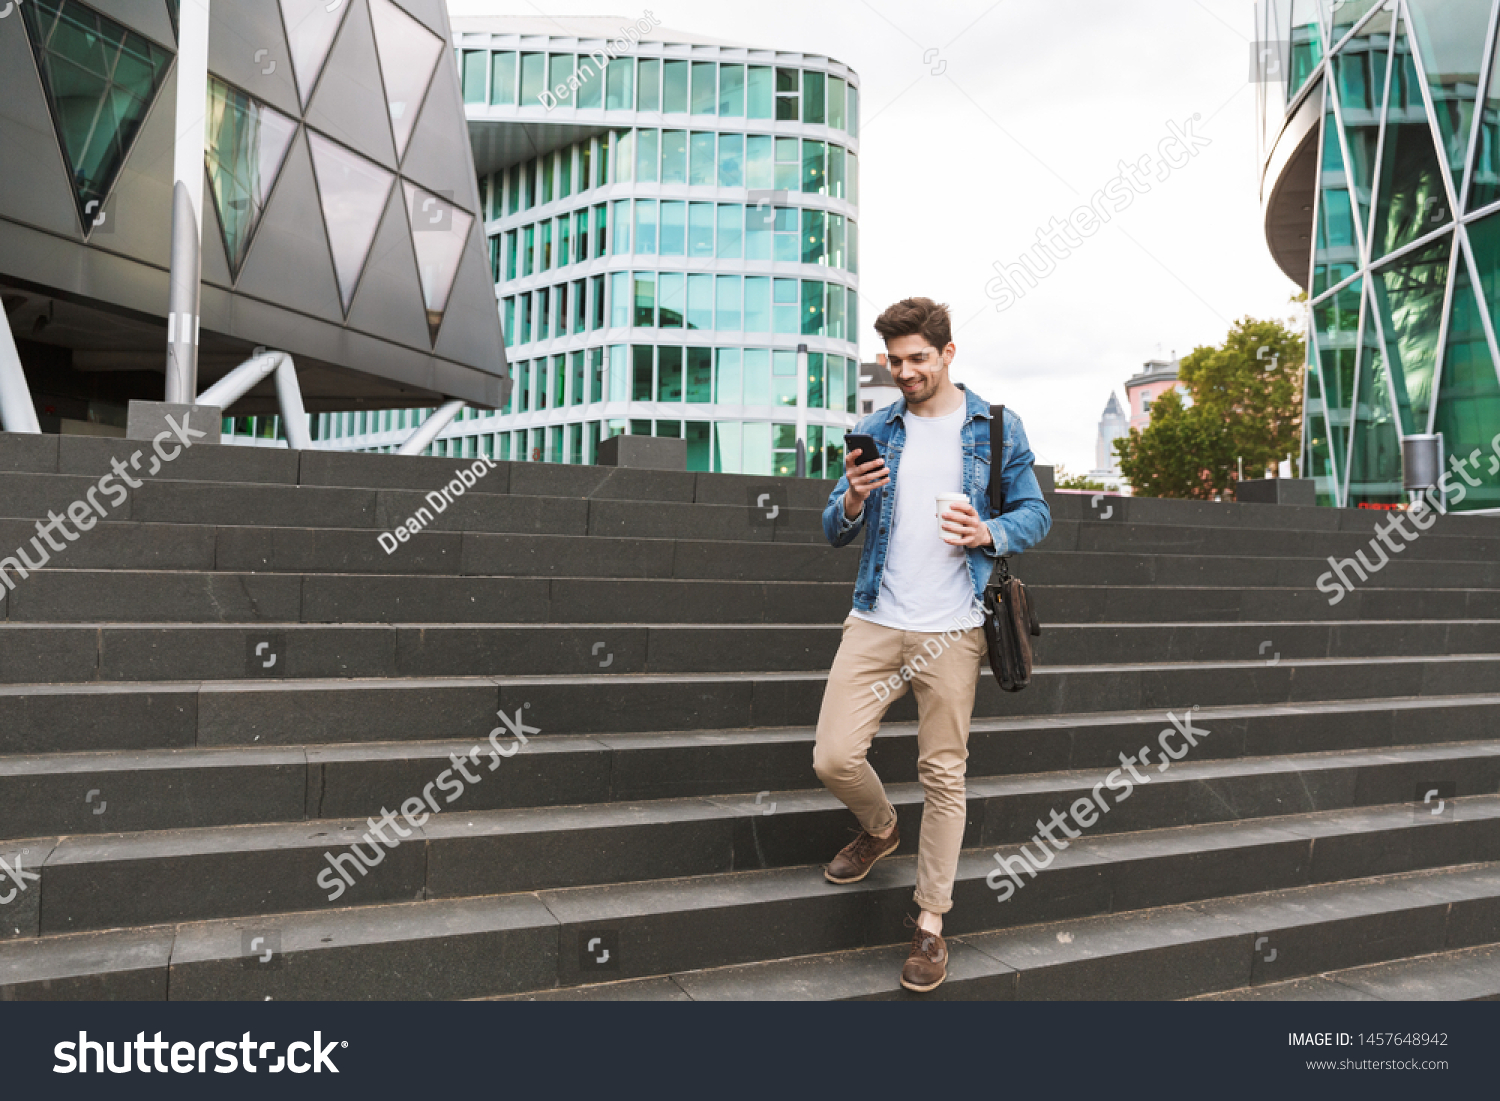 Handsome smiling young man dressed casually spending time outdoors at the city, using mobile phone while walking down stairs #1457648942